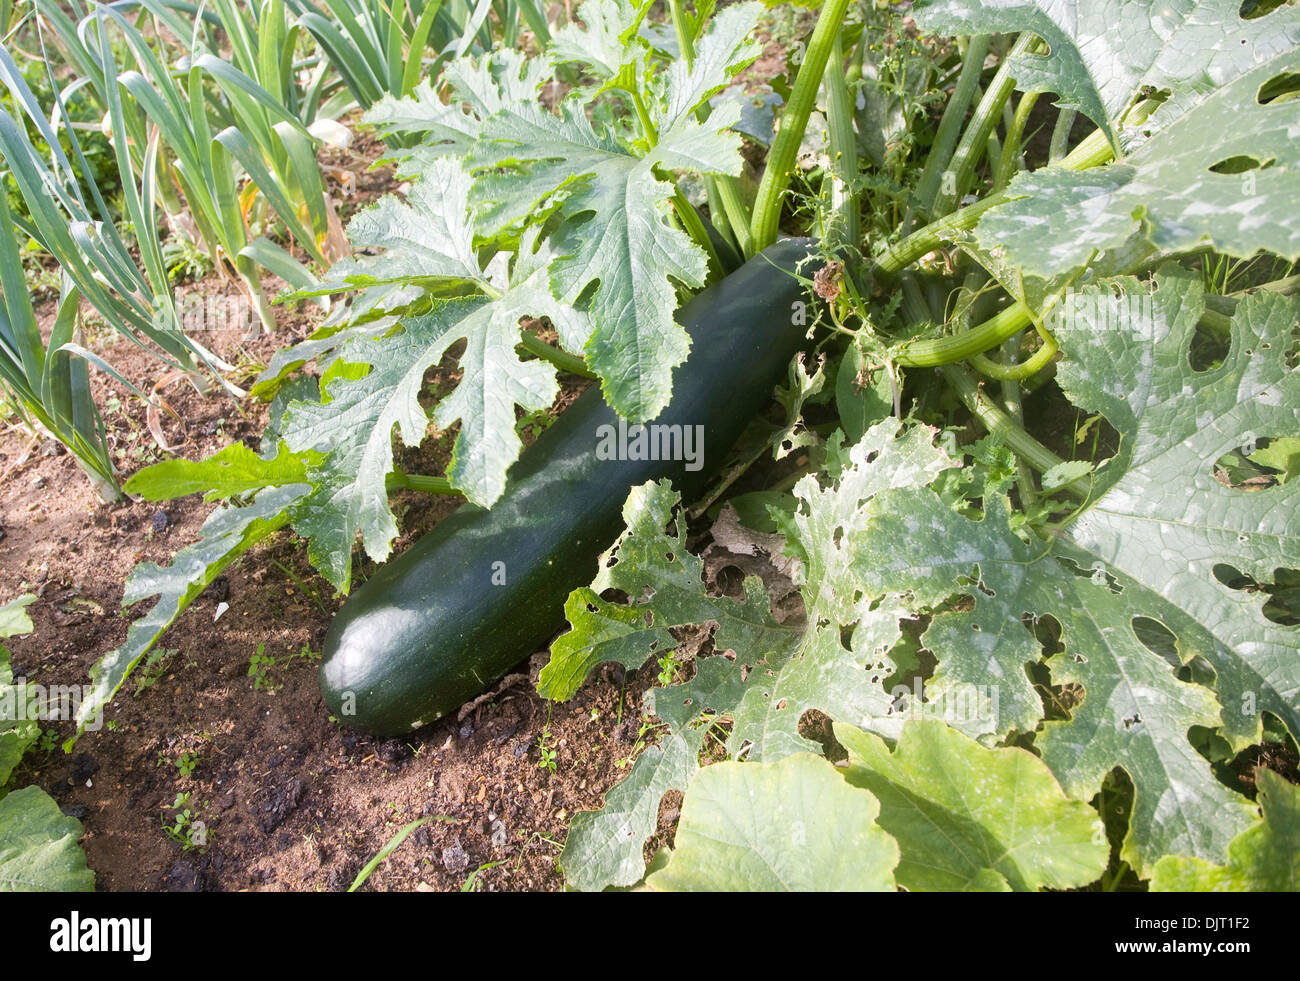 Zucchini or courgette plant fruit and leaves growing in vegetable garden UK Stock Photo